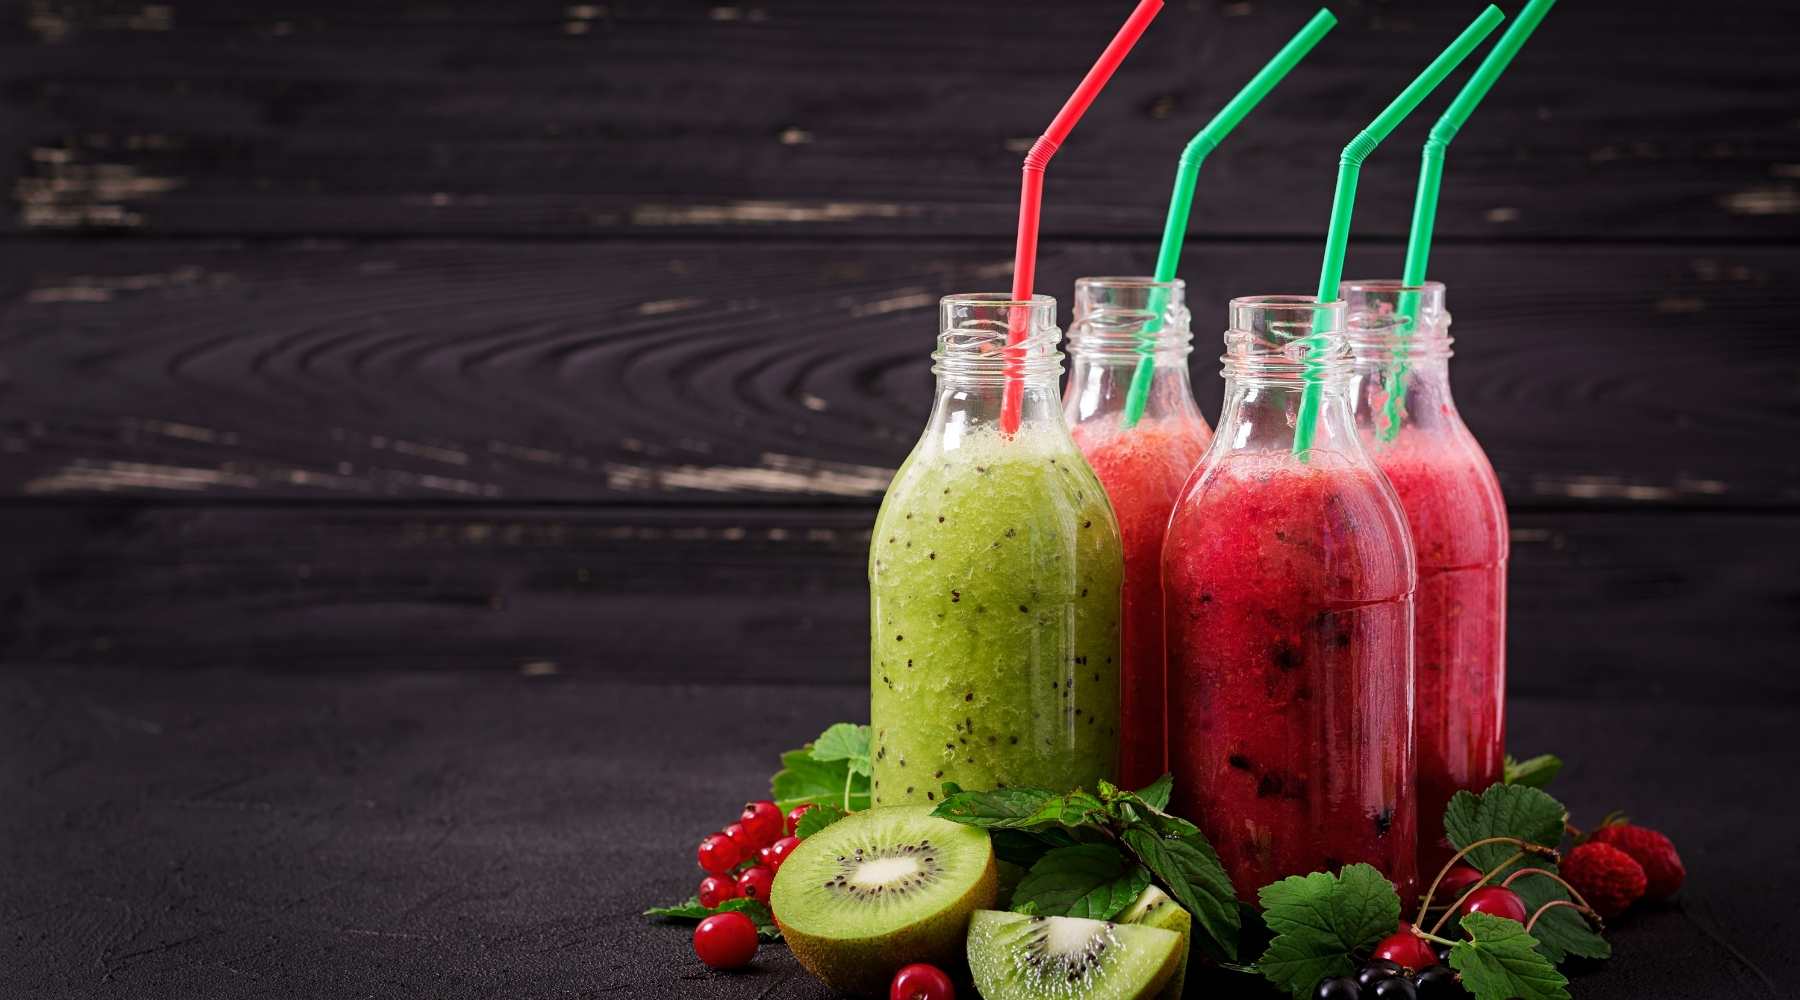 Cold Pressed Juices To Relieve Acid Reflux